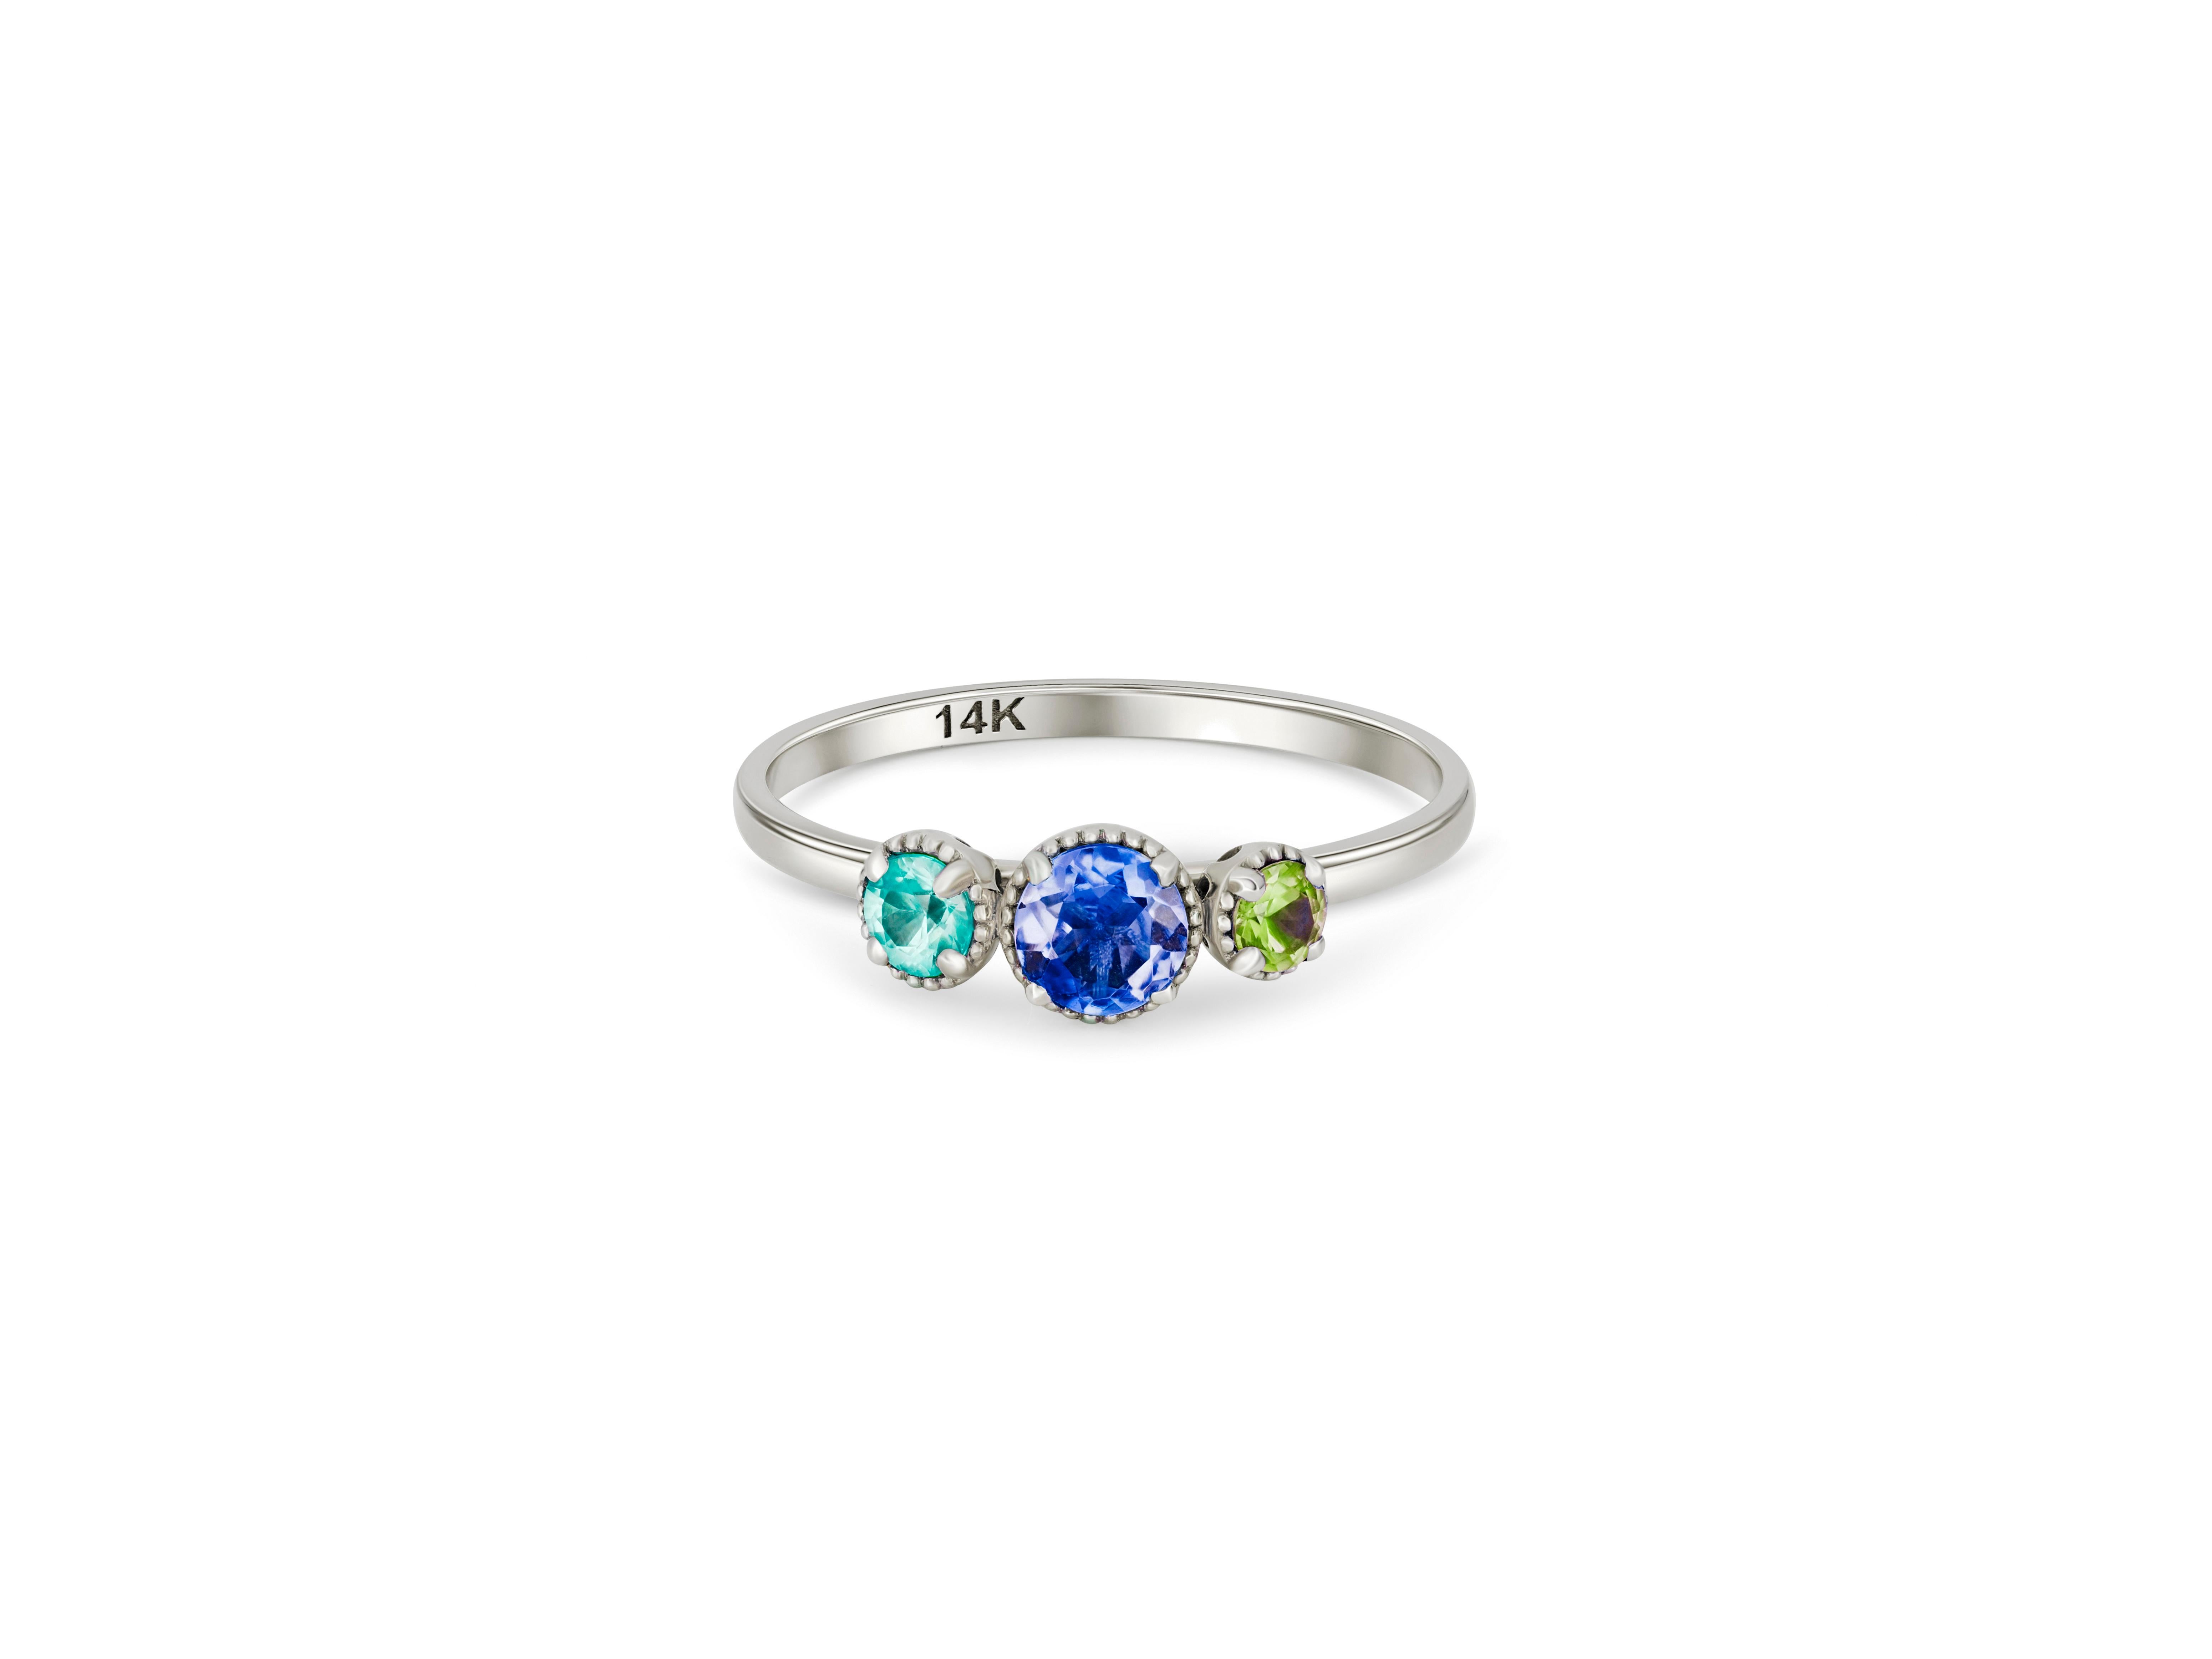 Trio gems 14k gold ring
3 gemstone palette 14k gold ring.  Sapphire, paraiba, peridot 14k gold ring.  Color contrast gold ring. Paraiba, blue and green gemstone ring. 

Metal: 14k gold
Weight: 1.8 gr depends from size

Gemstones:
Blue: lab sapphire,